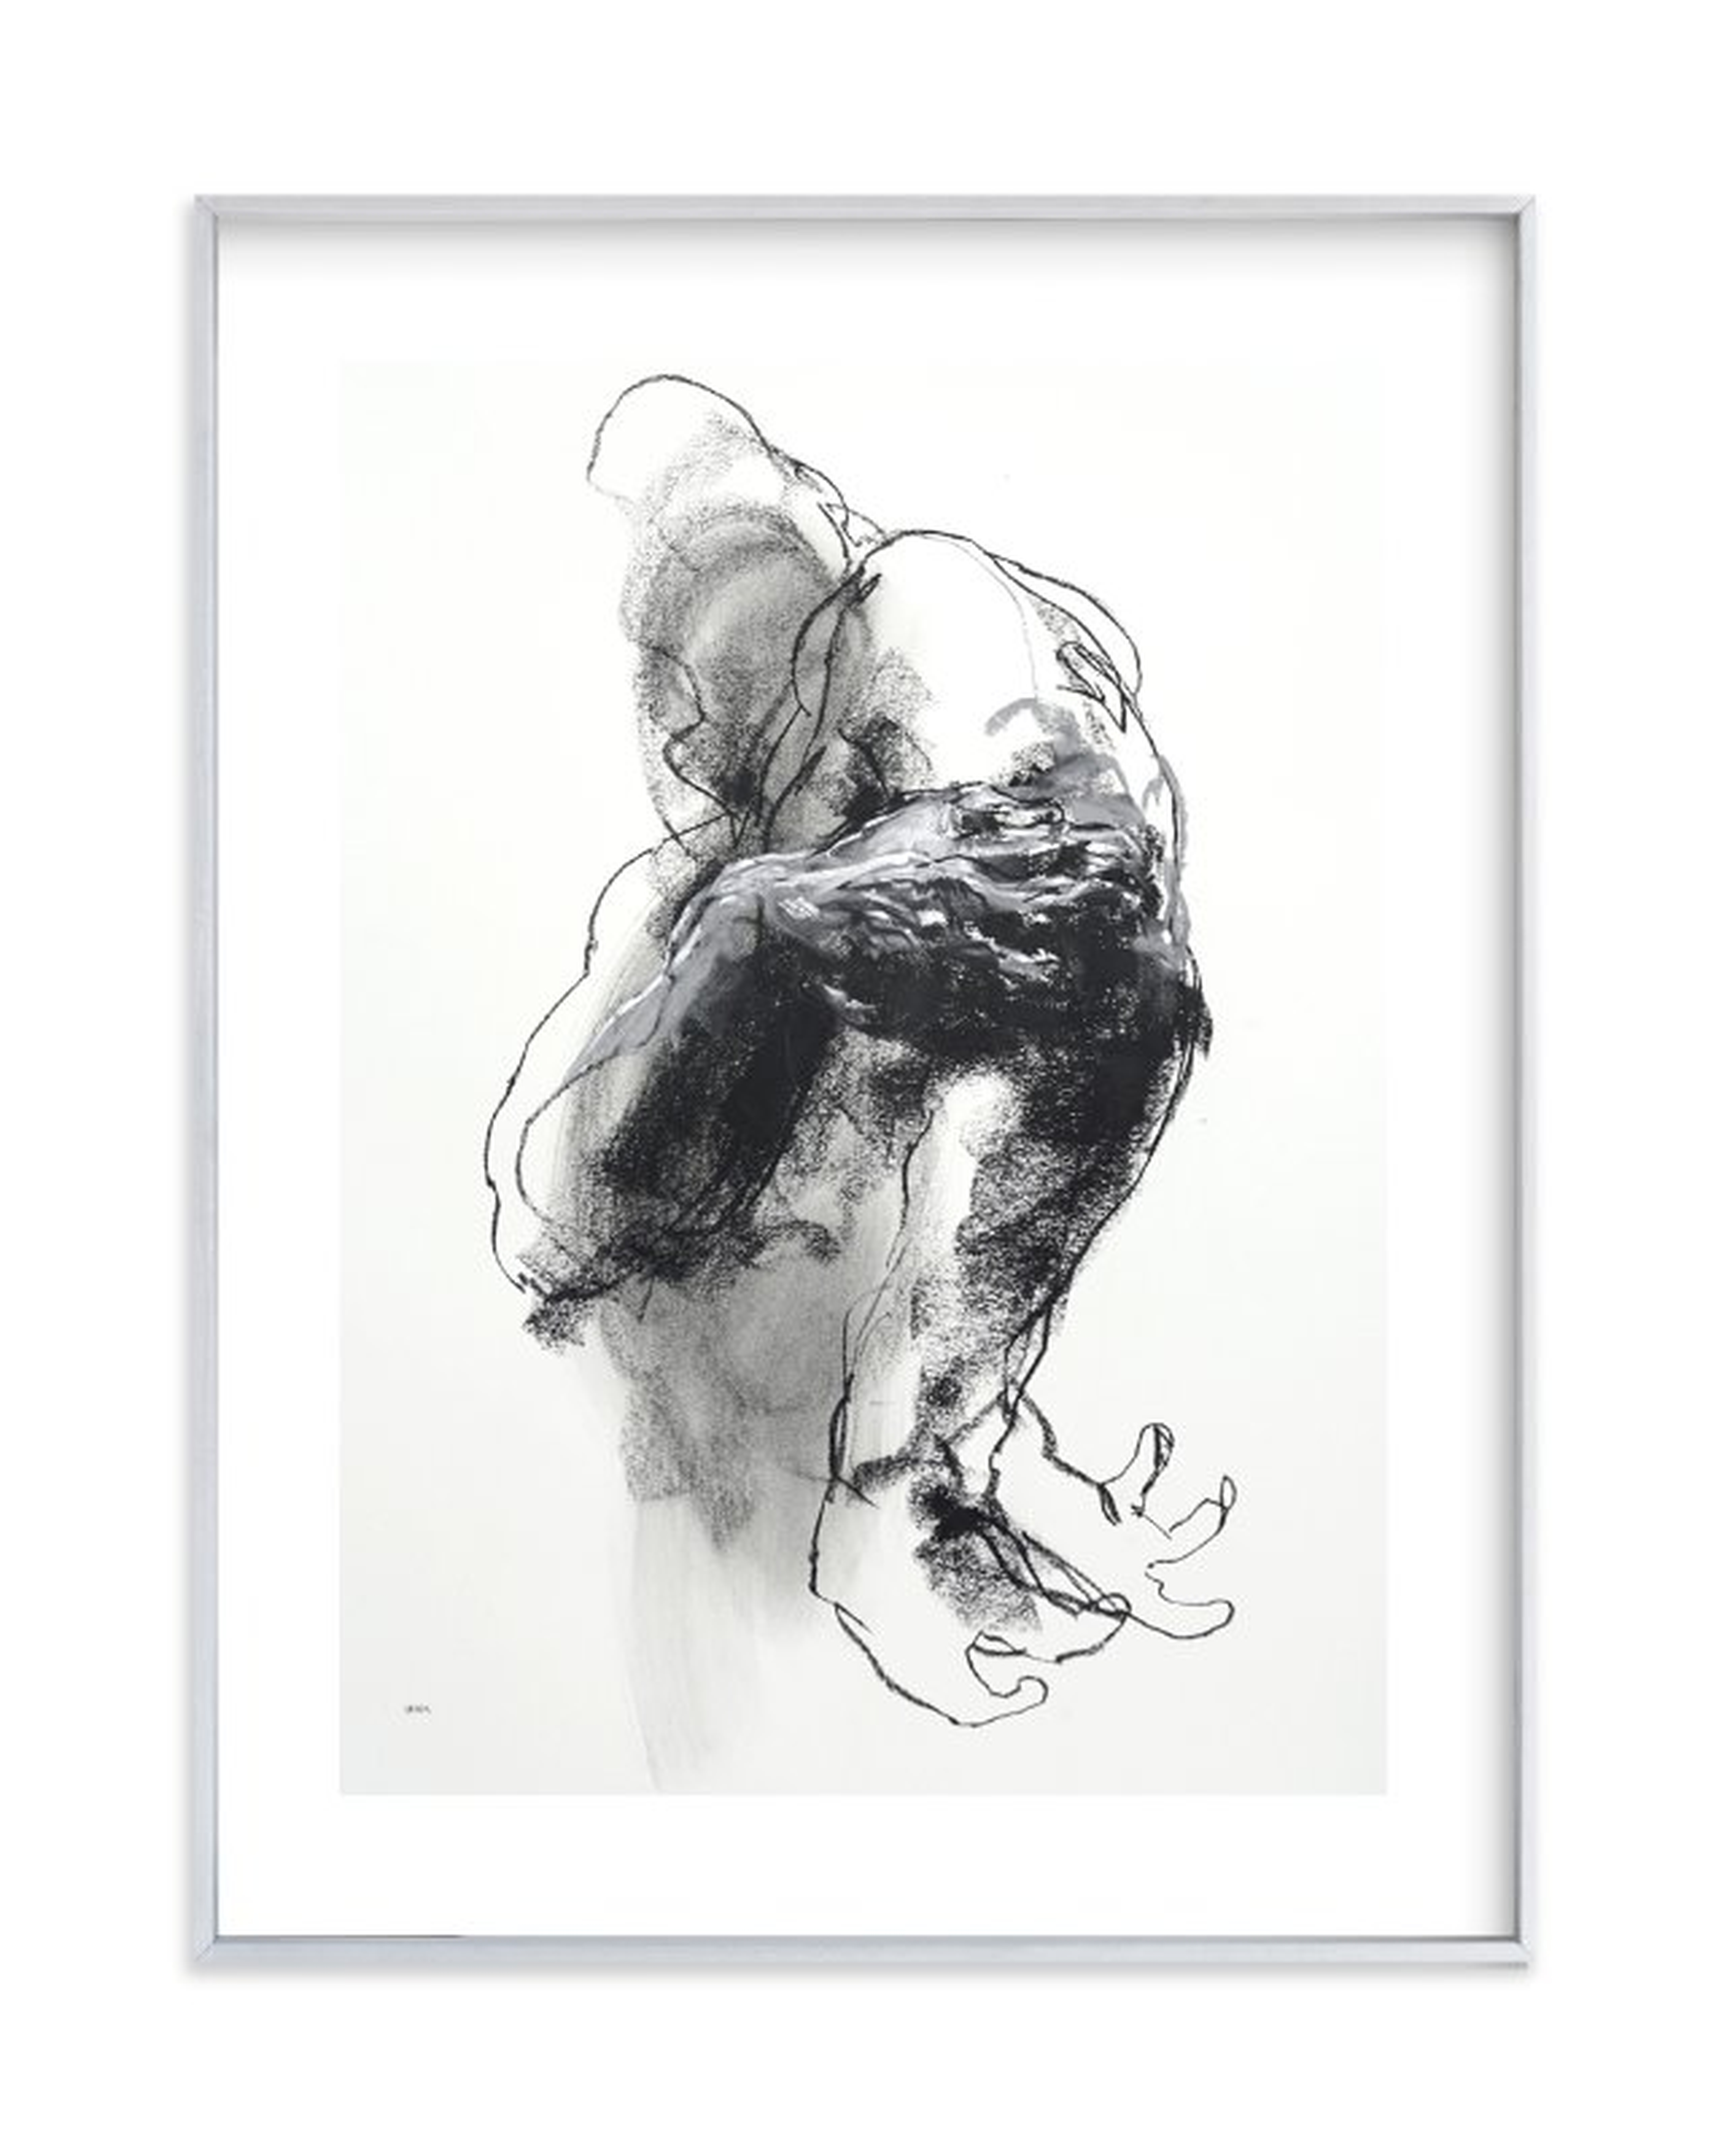 Drawing 340 - Grasping Man - 18" x 24" - Brushed Silver Frame - White Border - Minted